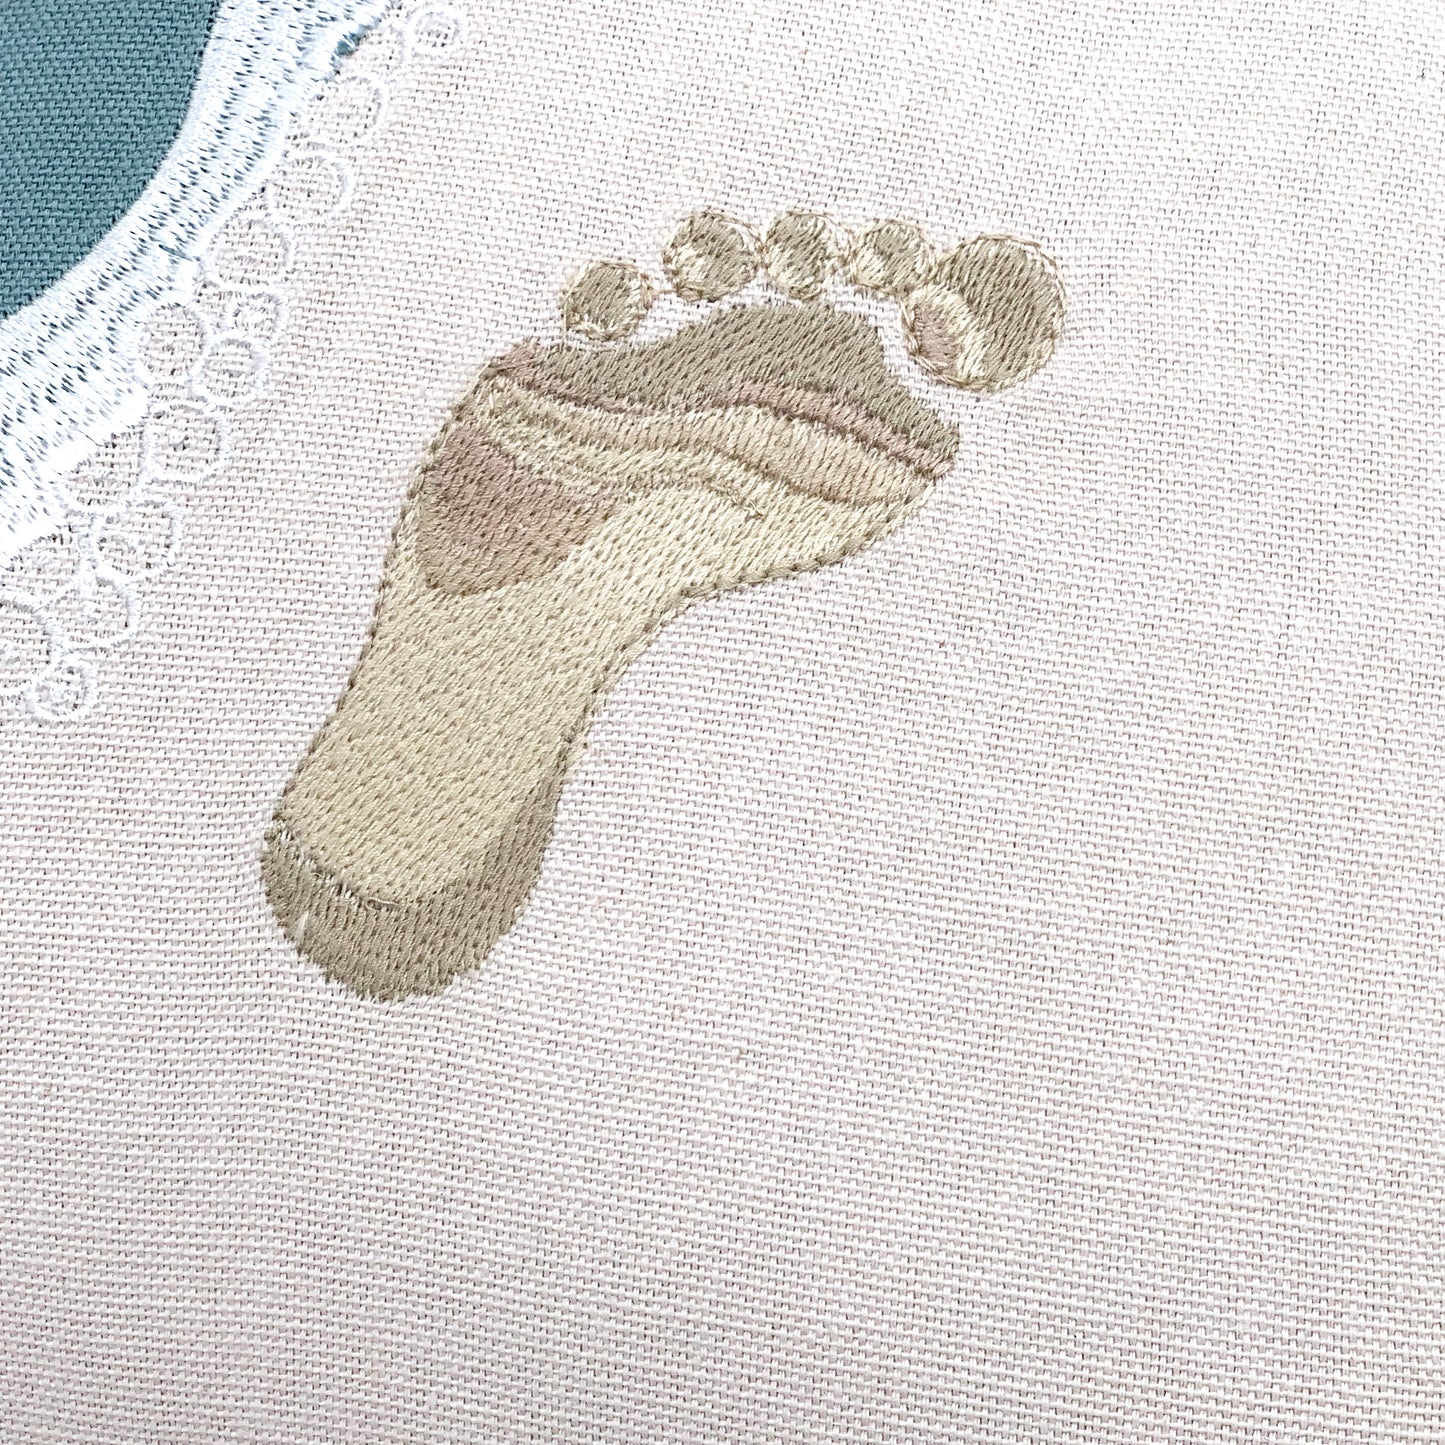 Detail shot of the embroidery work on the Best Friends Footprints Lumbar Pillow.